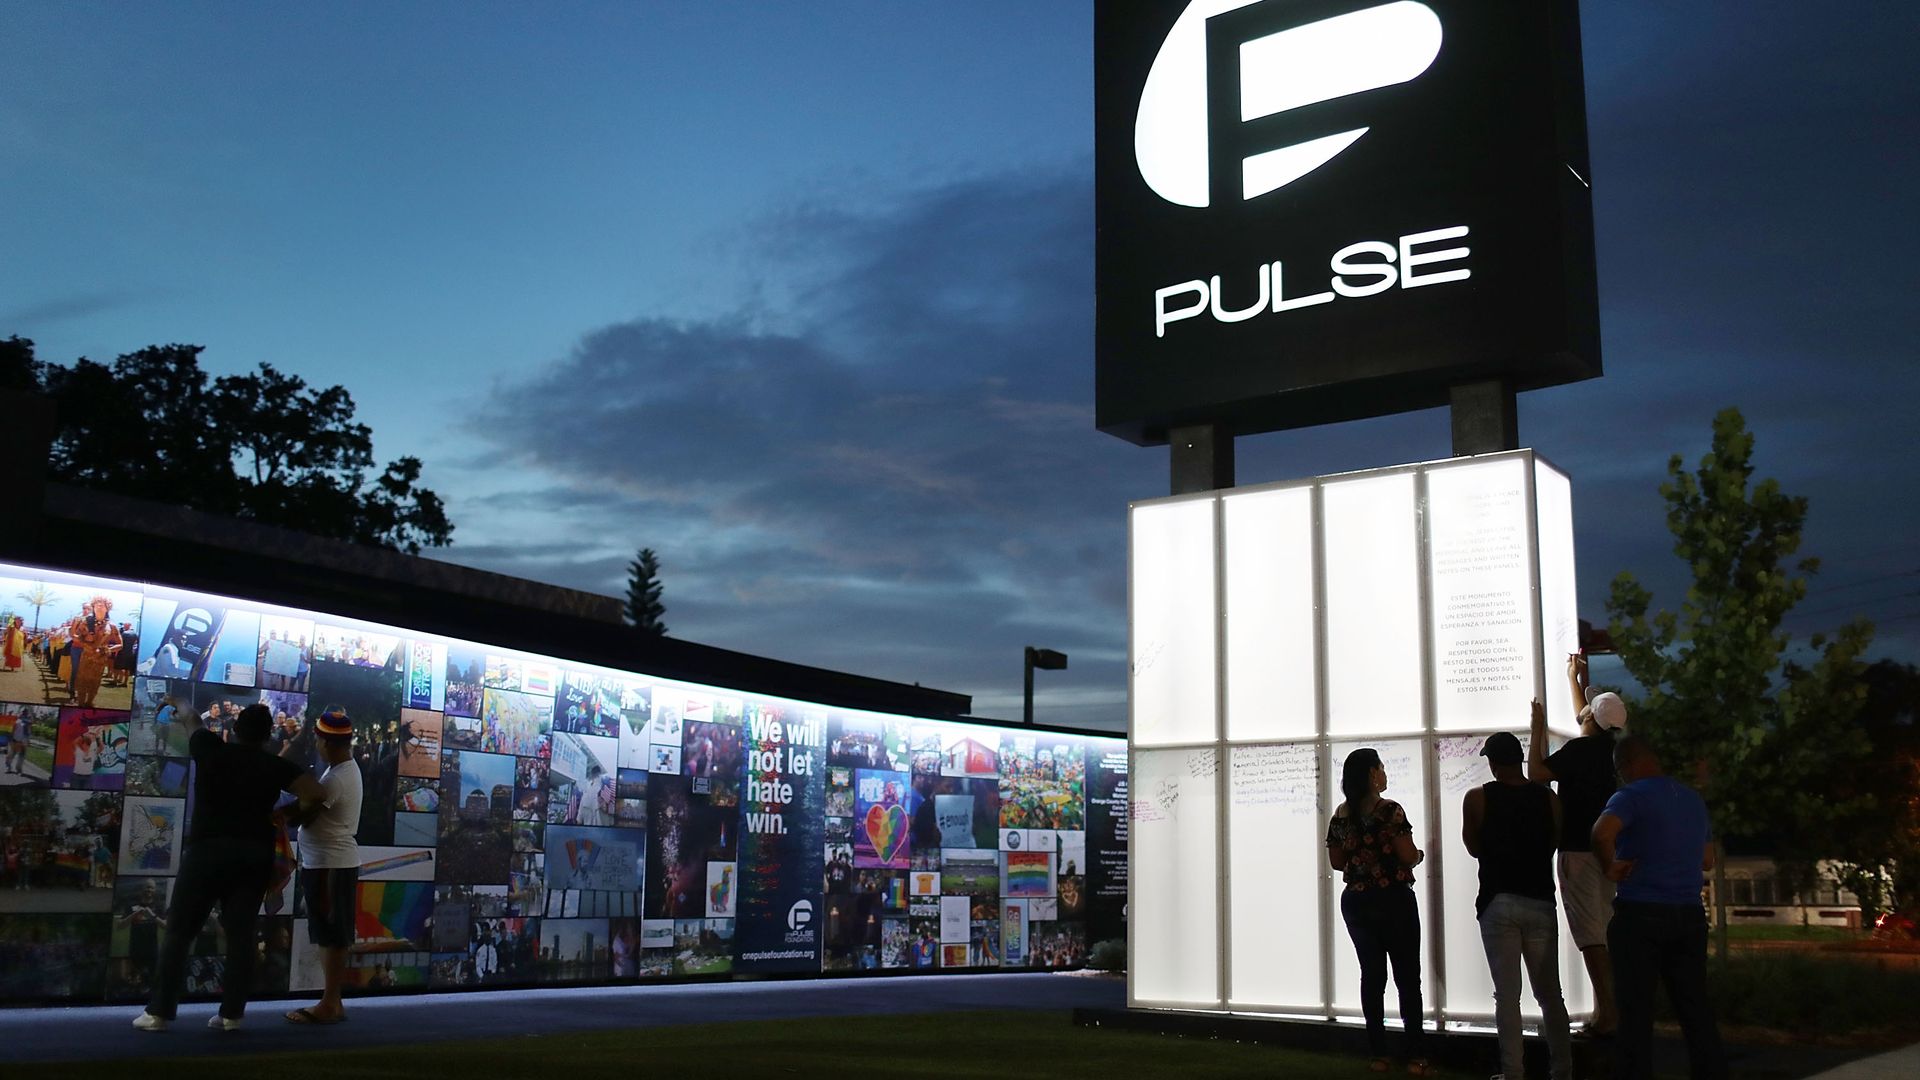 People in 2018 visiting a memorial for the 49 victims of the Pulse nightclub shooting in Orlando.